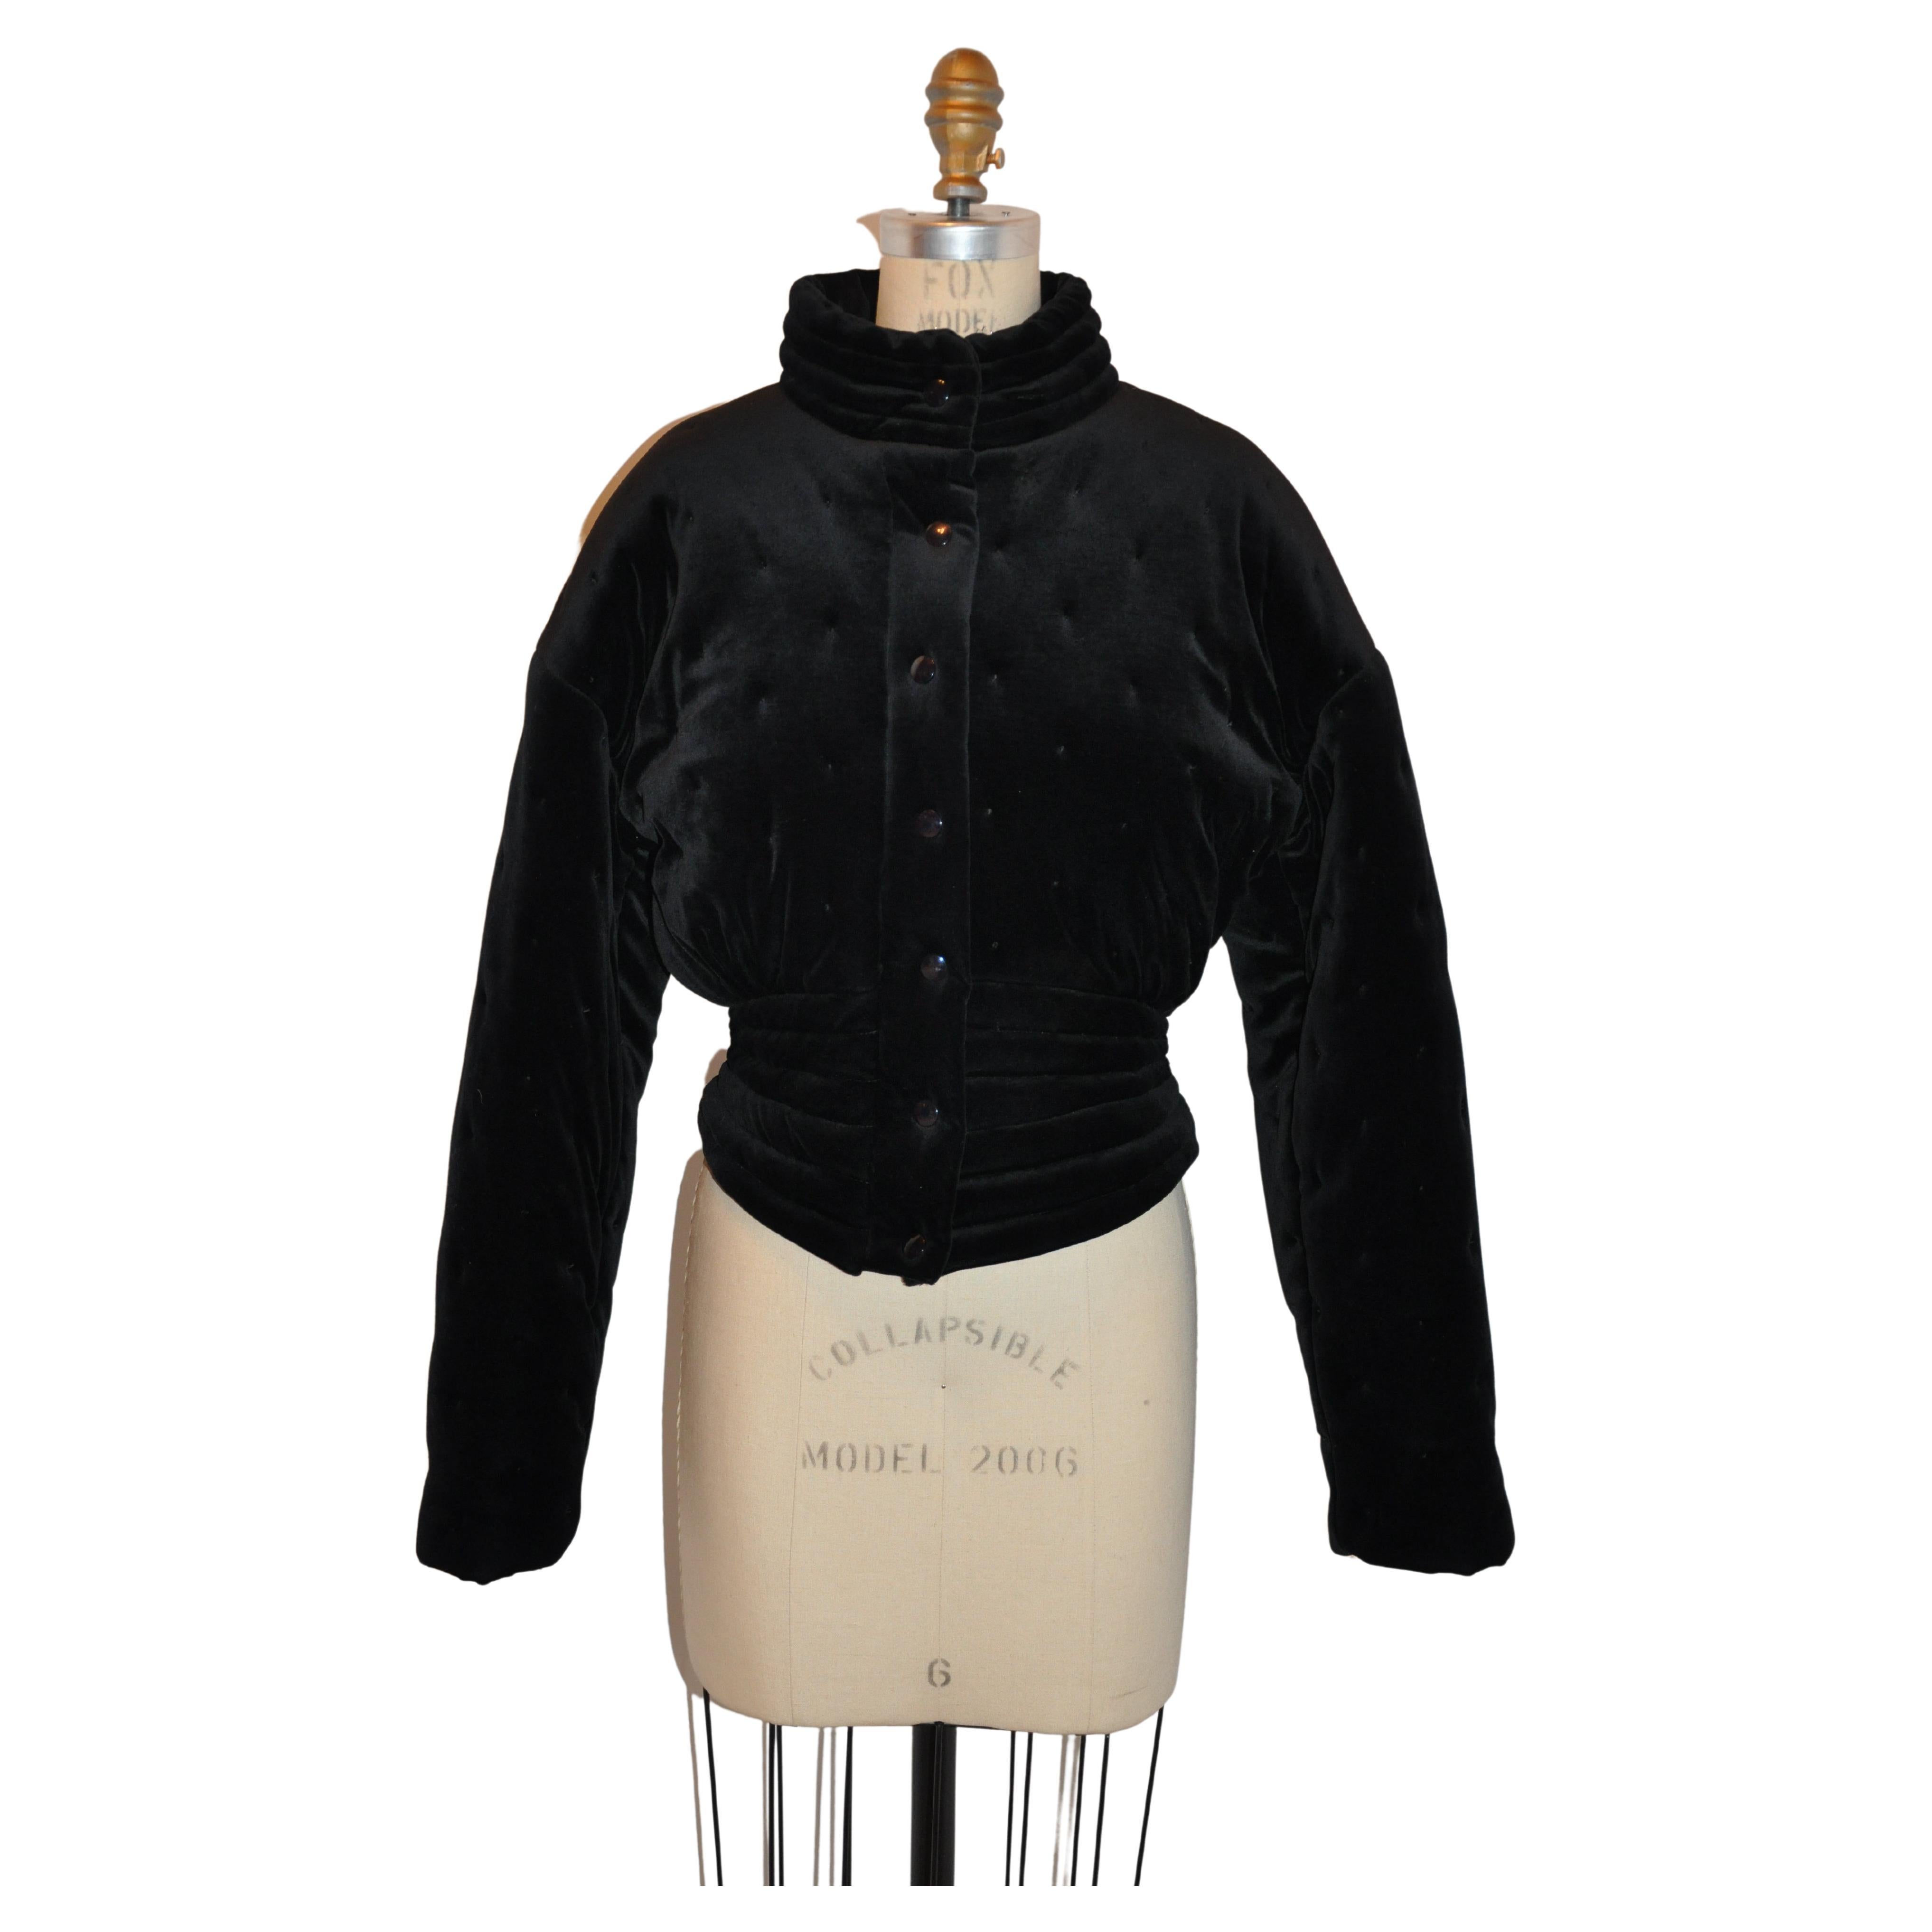 Angelo Tarlazzi Black "Pin-Cushion" Quilted Velour "Space-Age" Zippered Jacket For Sale